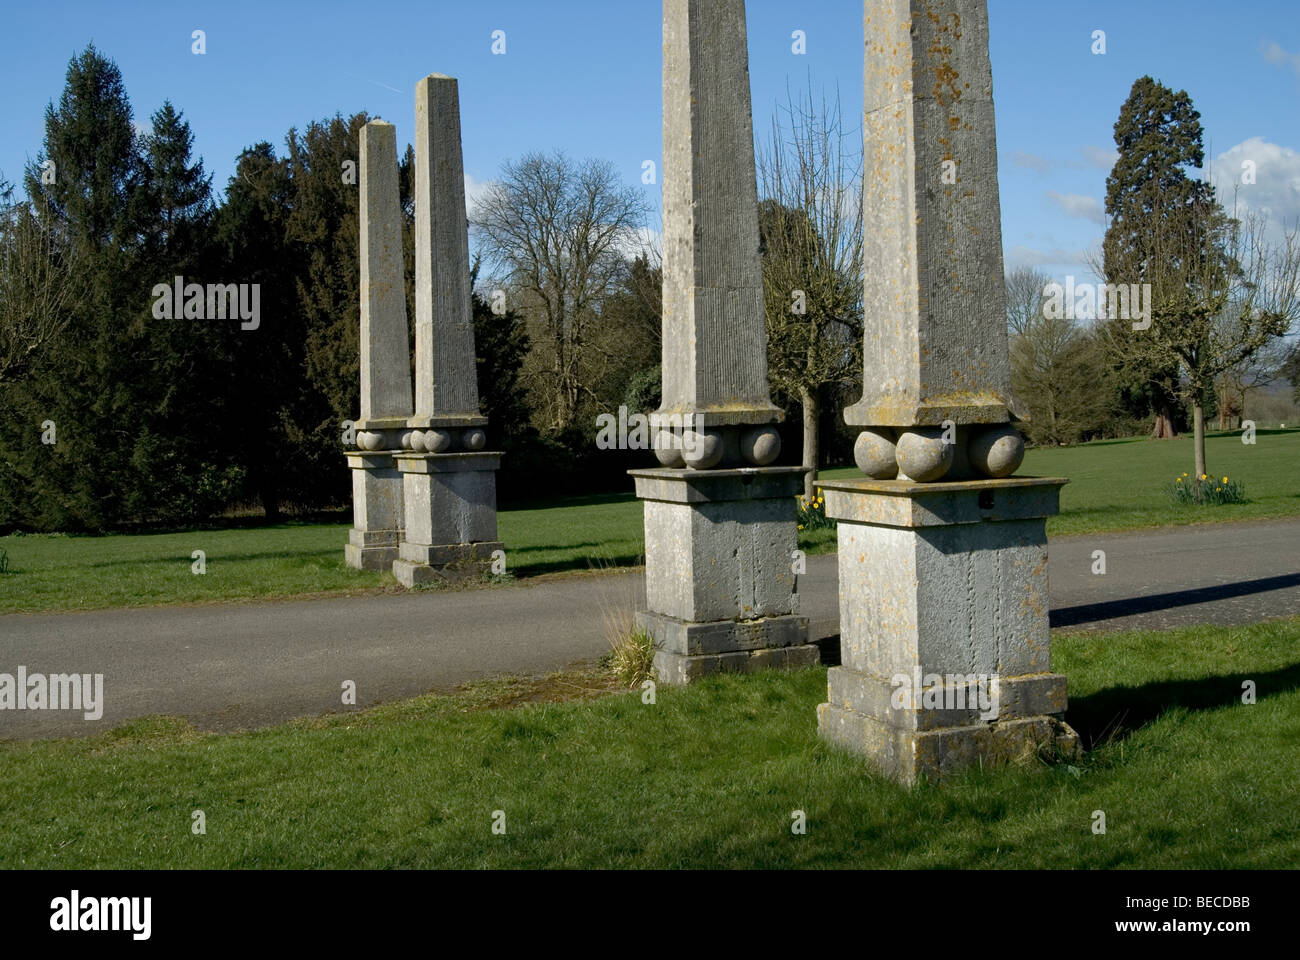 landscape view of four columns in a row either side of a road Stock Photo